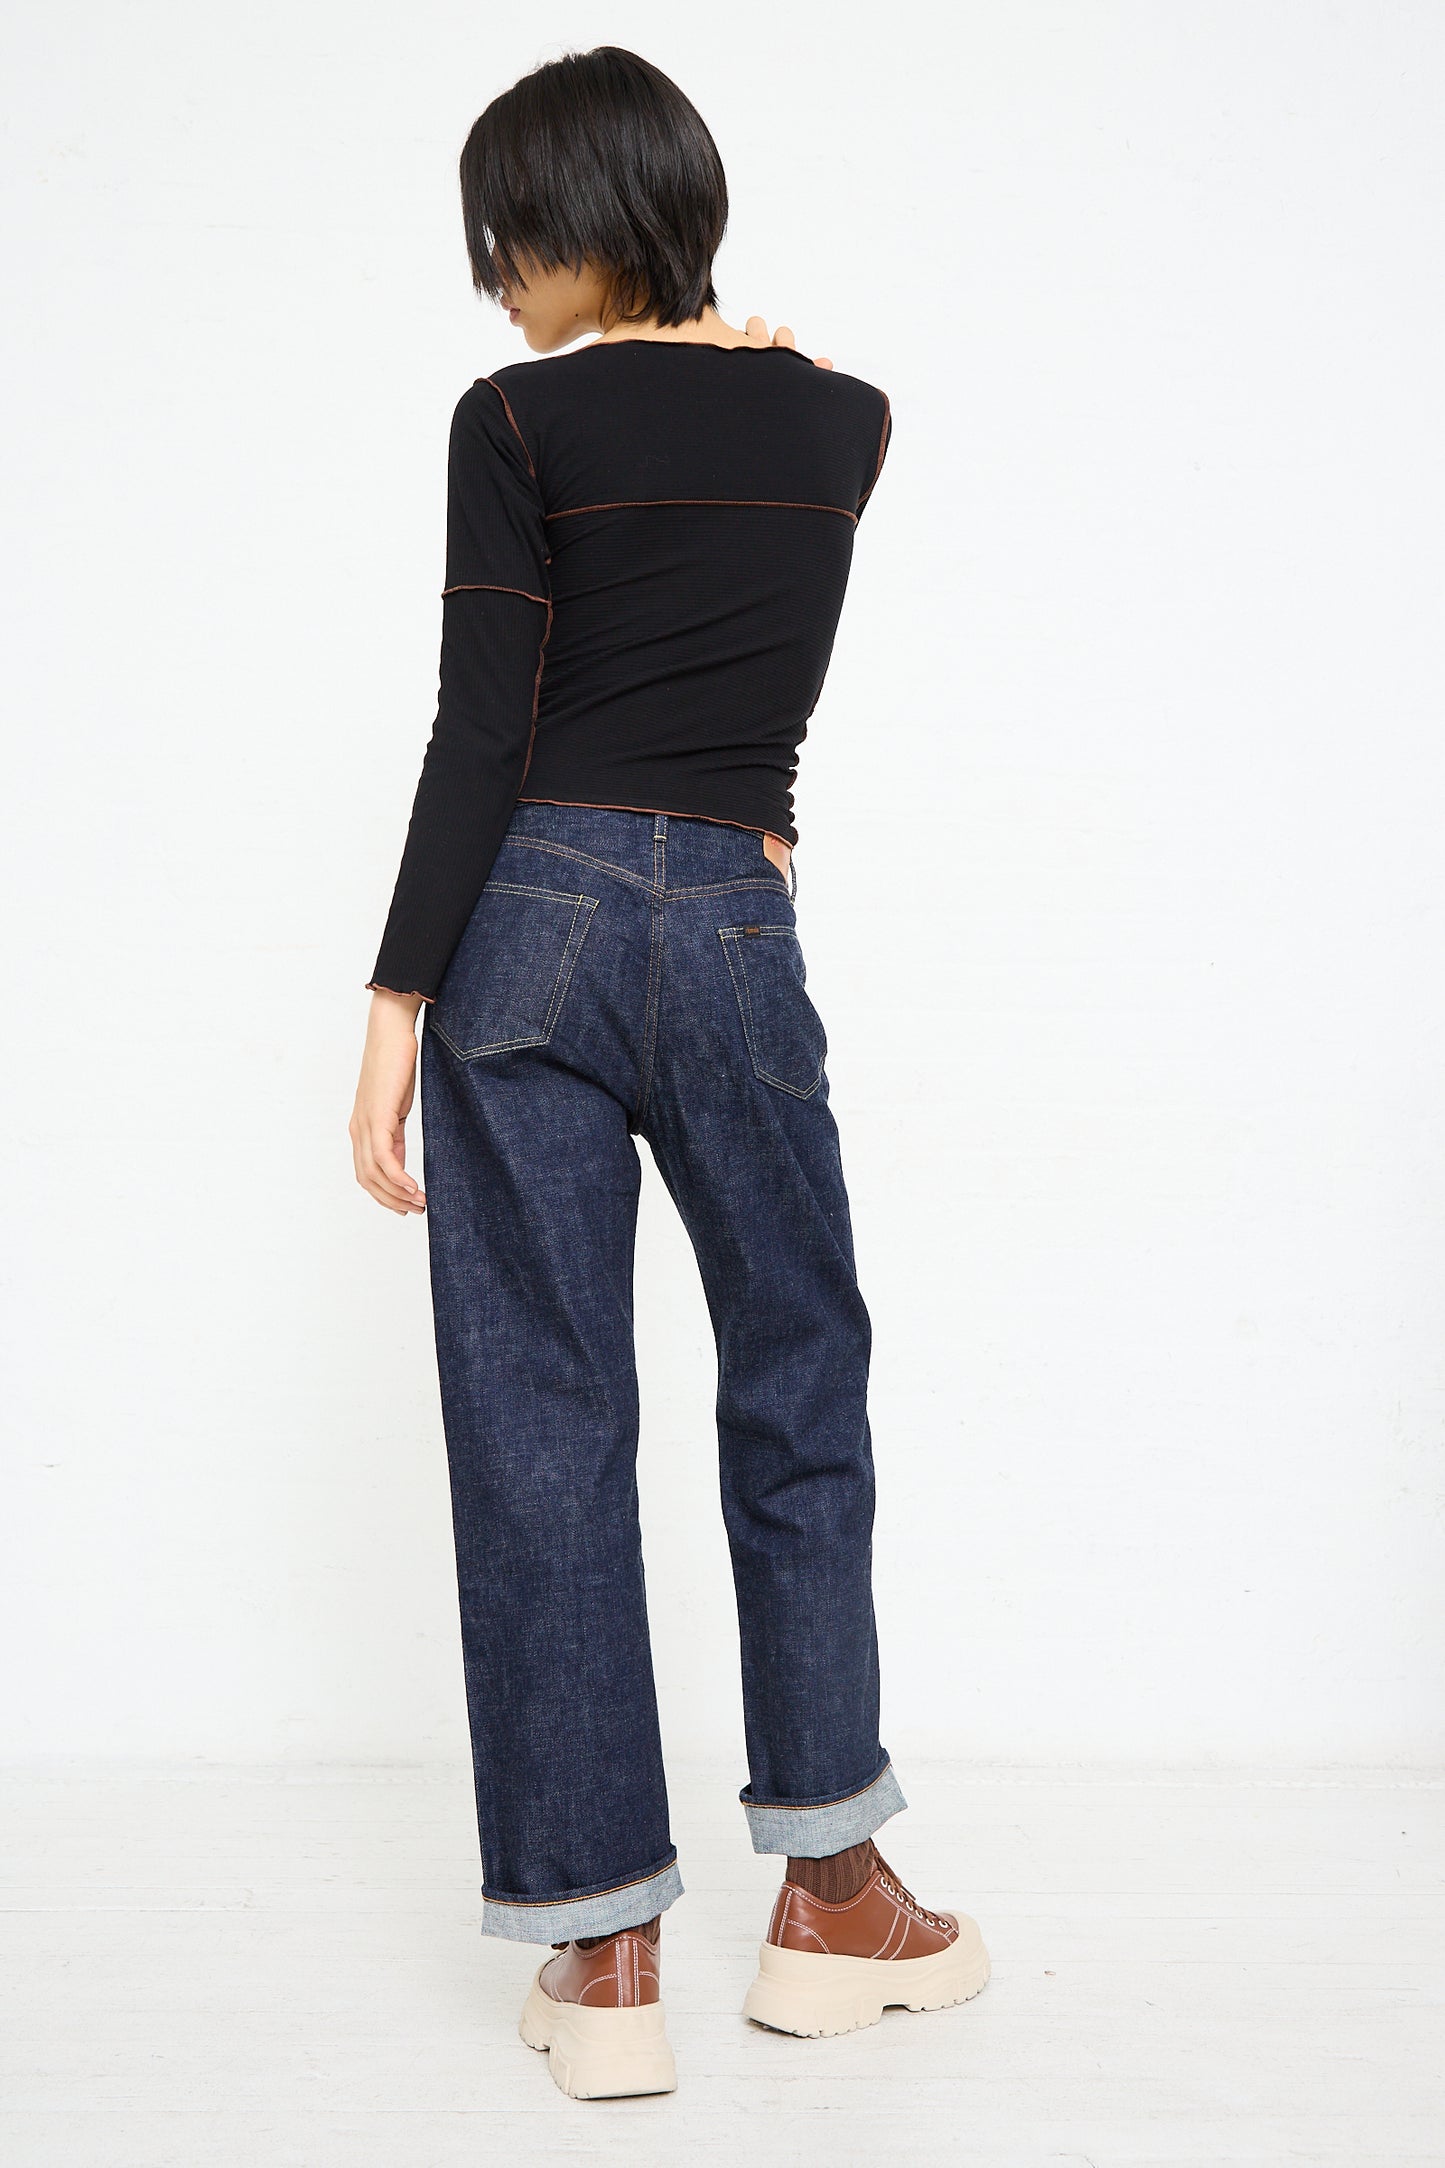 A person standing with their back to the camera, wearing a black top and blue denim Chimala 13.5 oz. Selvedge Denim Straight Cut in Rinse jeans, with one hand reaching across to touch the opposite.